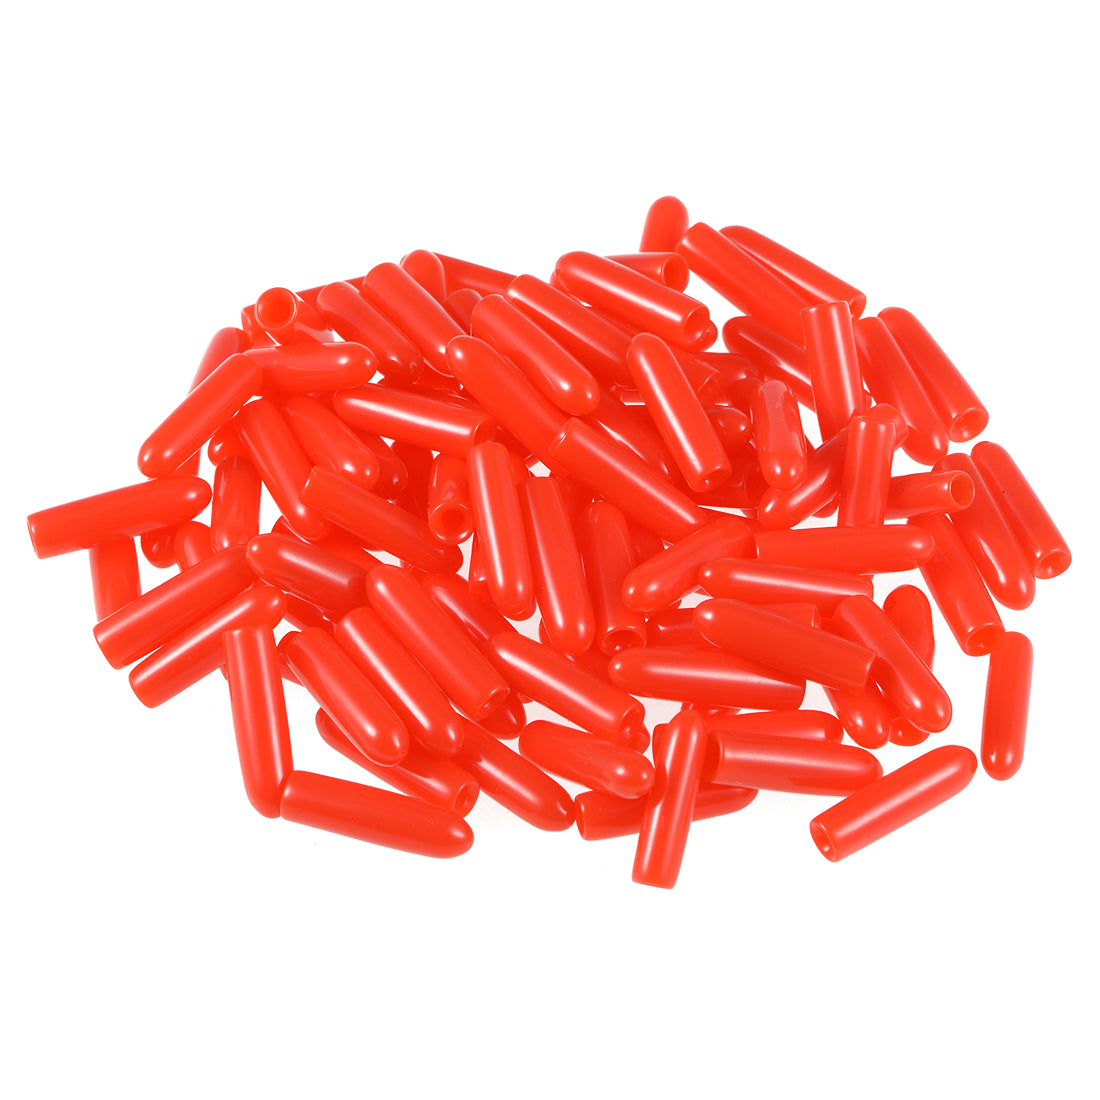 uxcell Uxcell 80pcs Rubber End Caps 2mm ID 15mm Height Screw Thread Protectors Red